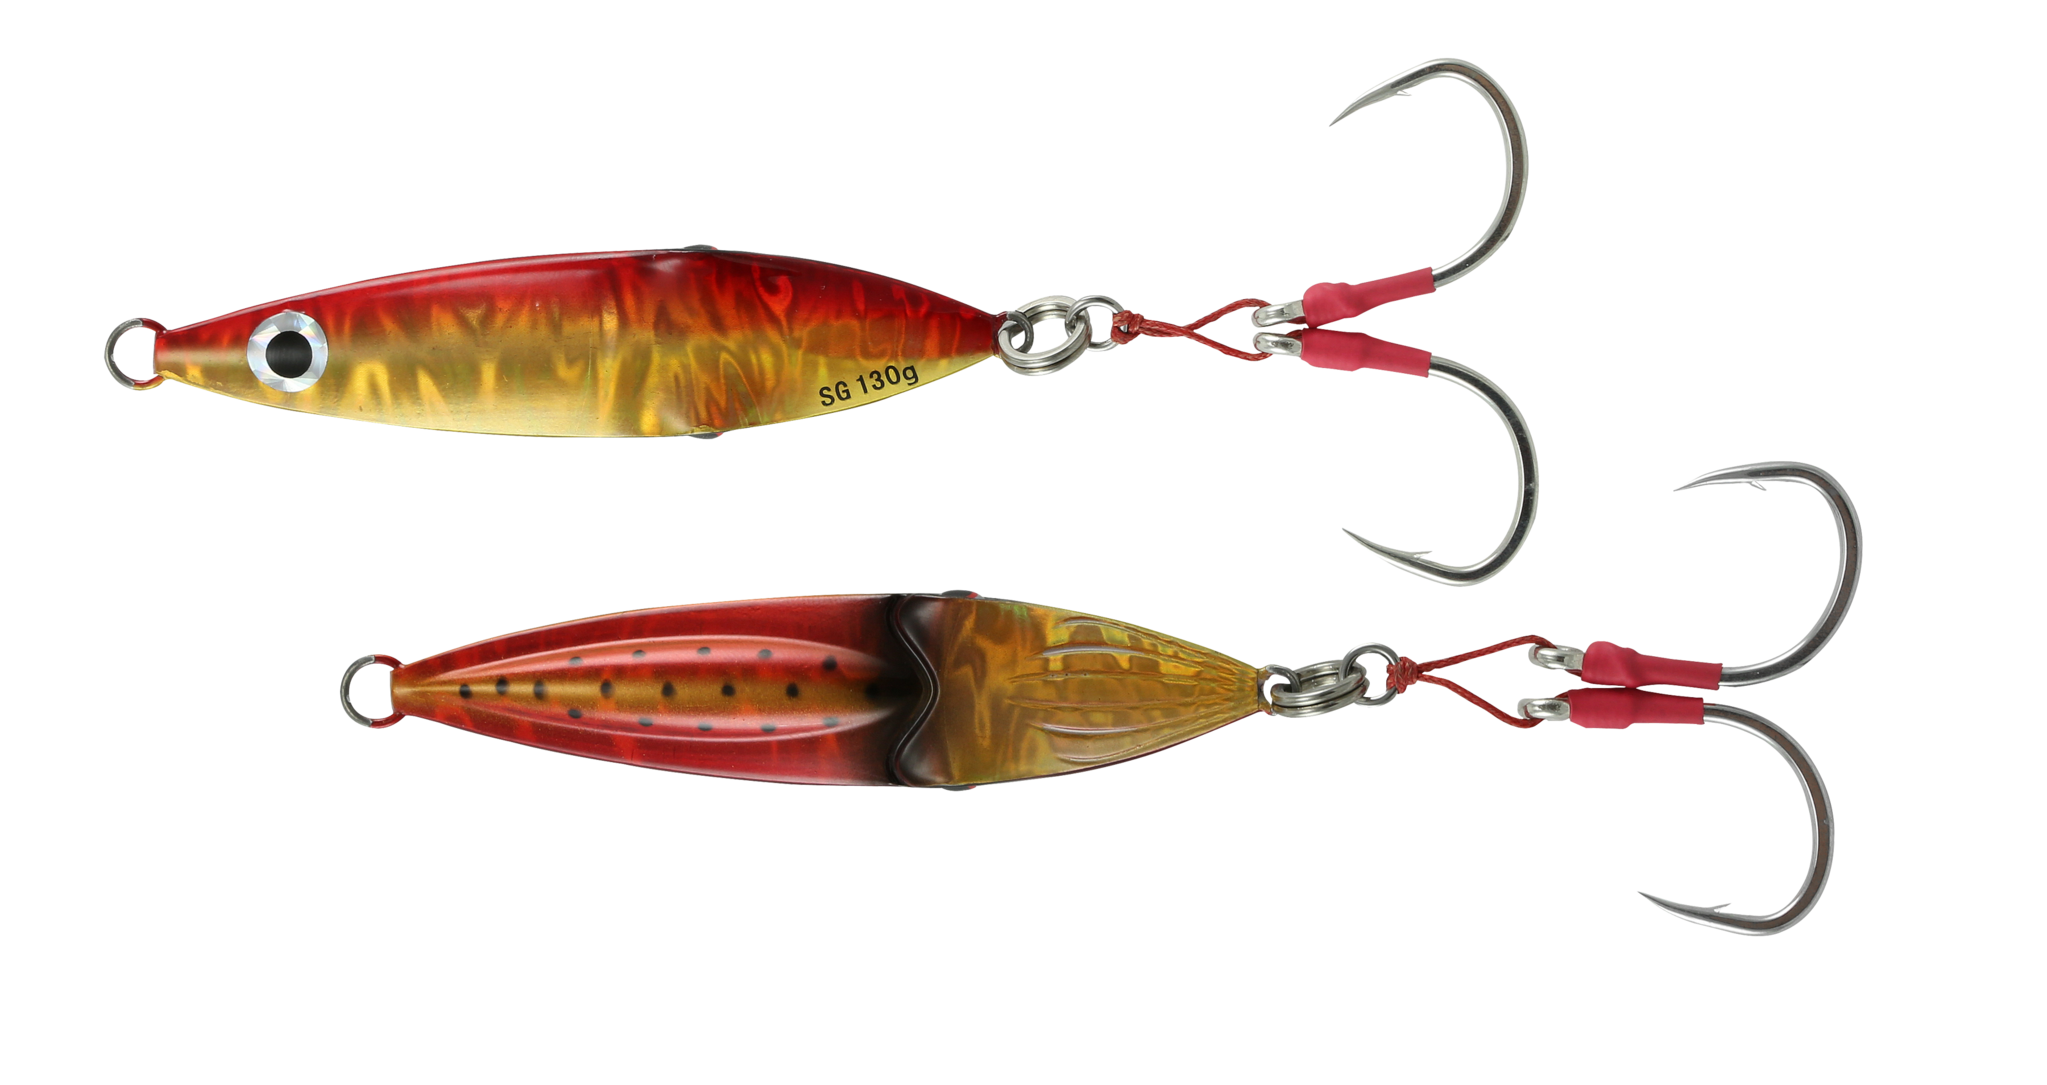 Savage Gear SJ-160-GR Squish Jig 160g Gold Red - Angler's Choice